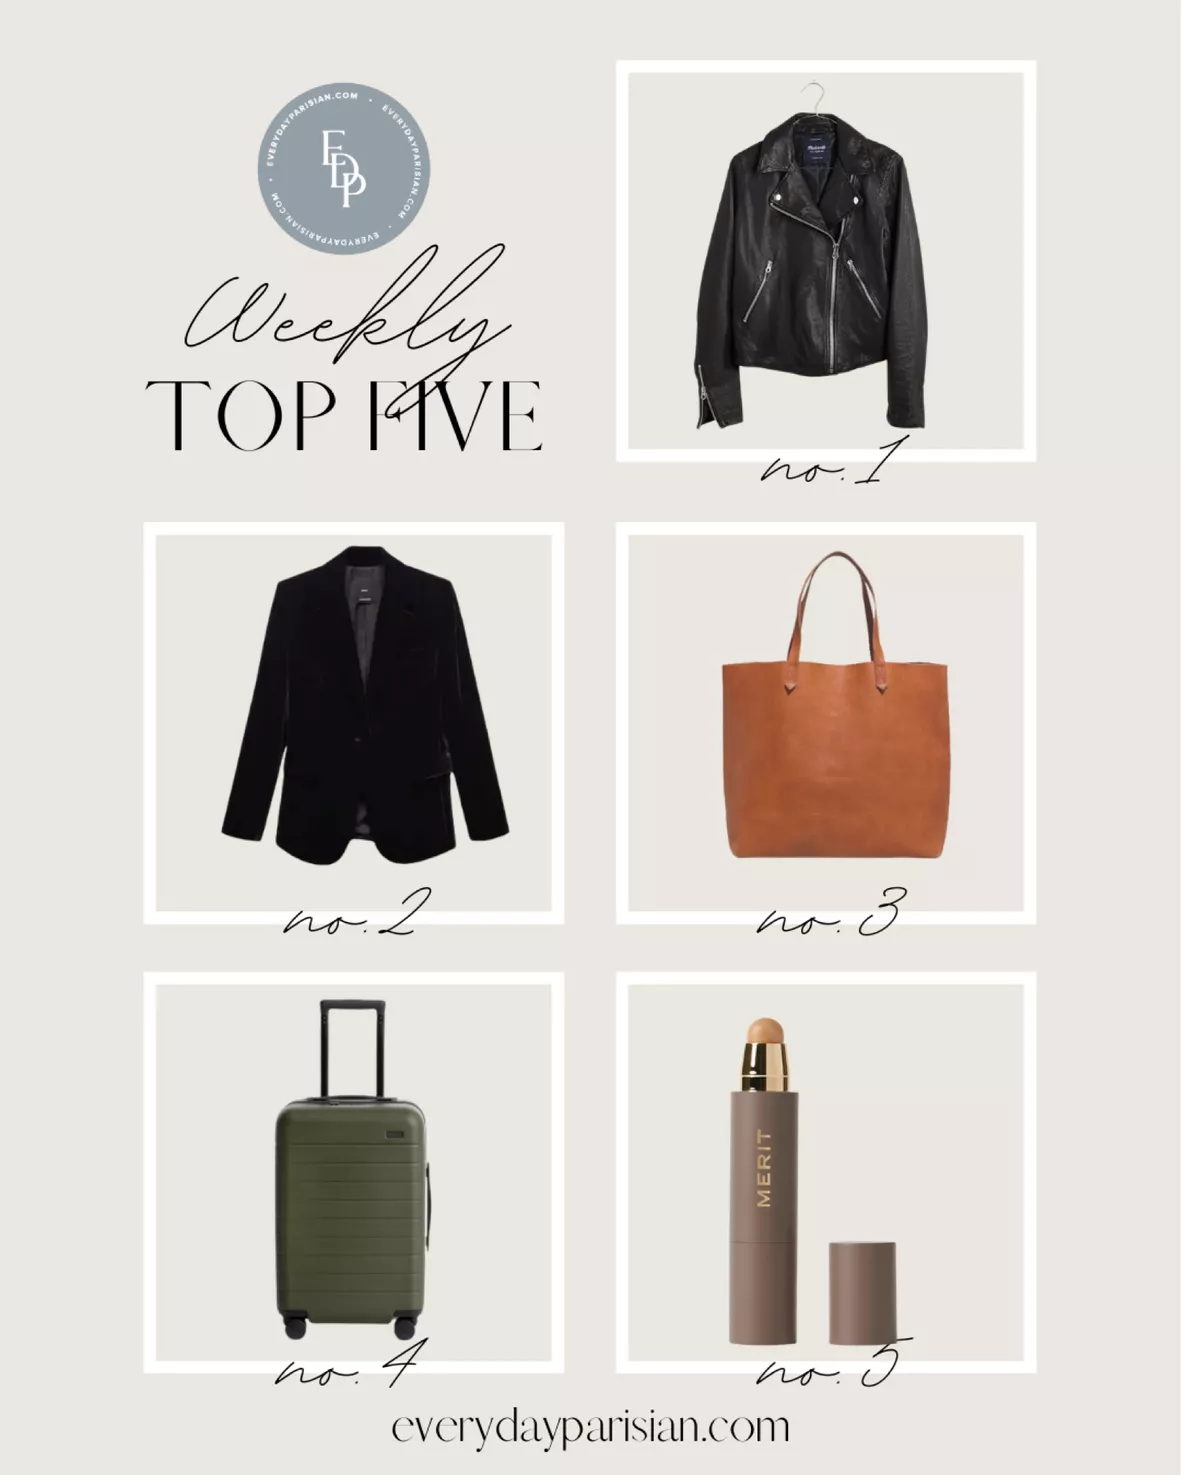 Best Sellers: The most popular items in Women's Everyday